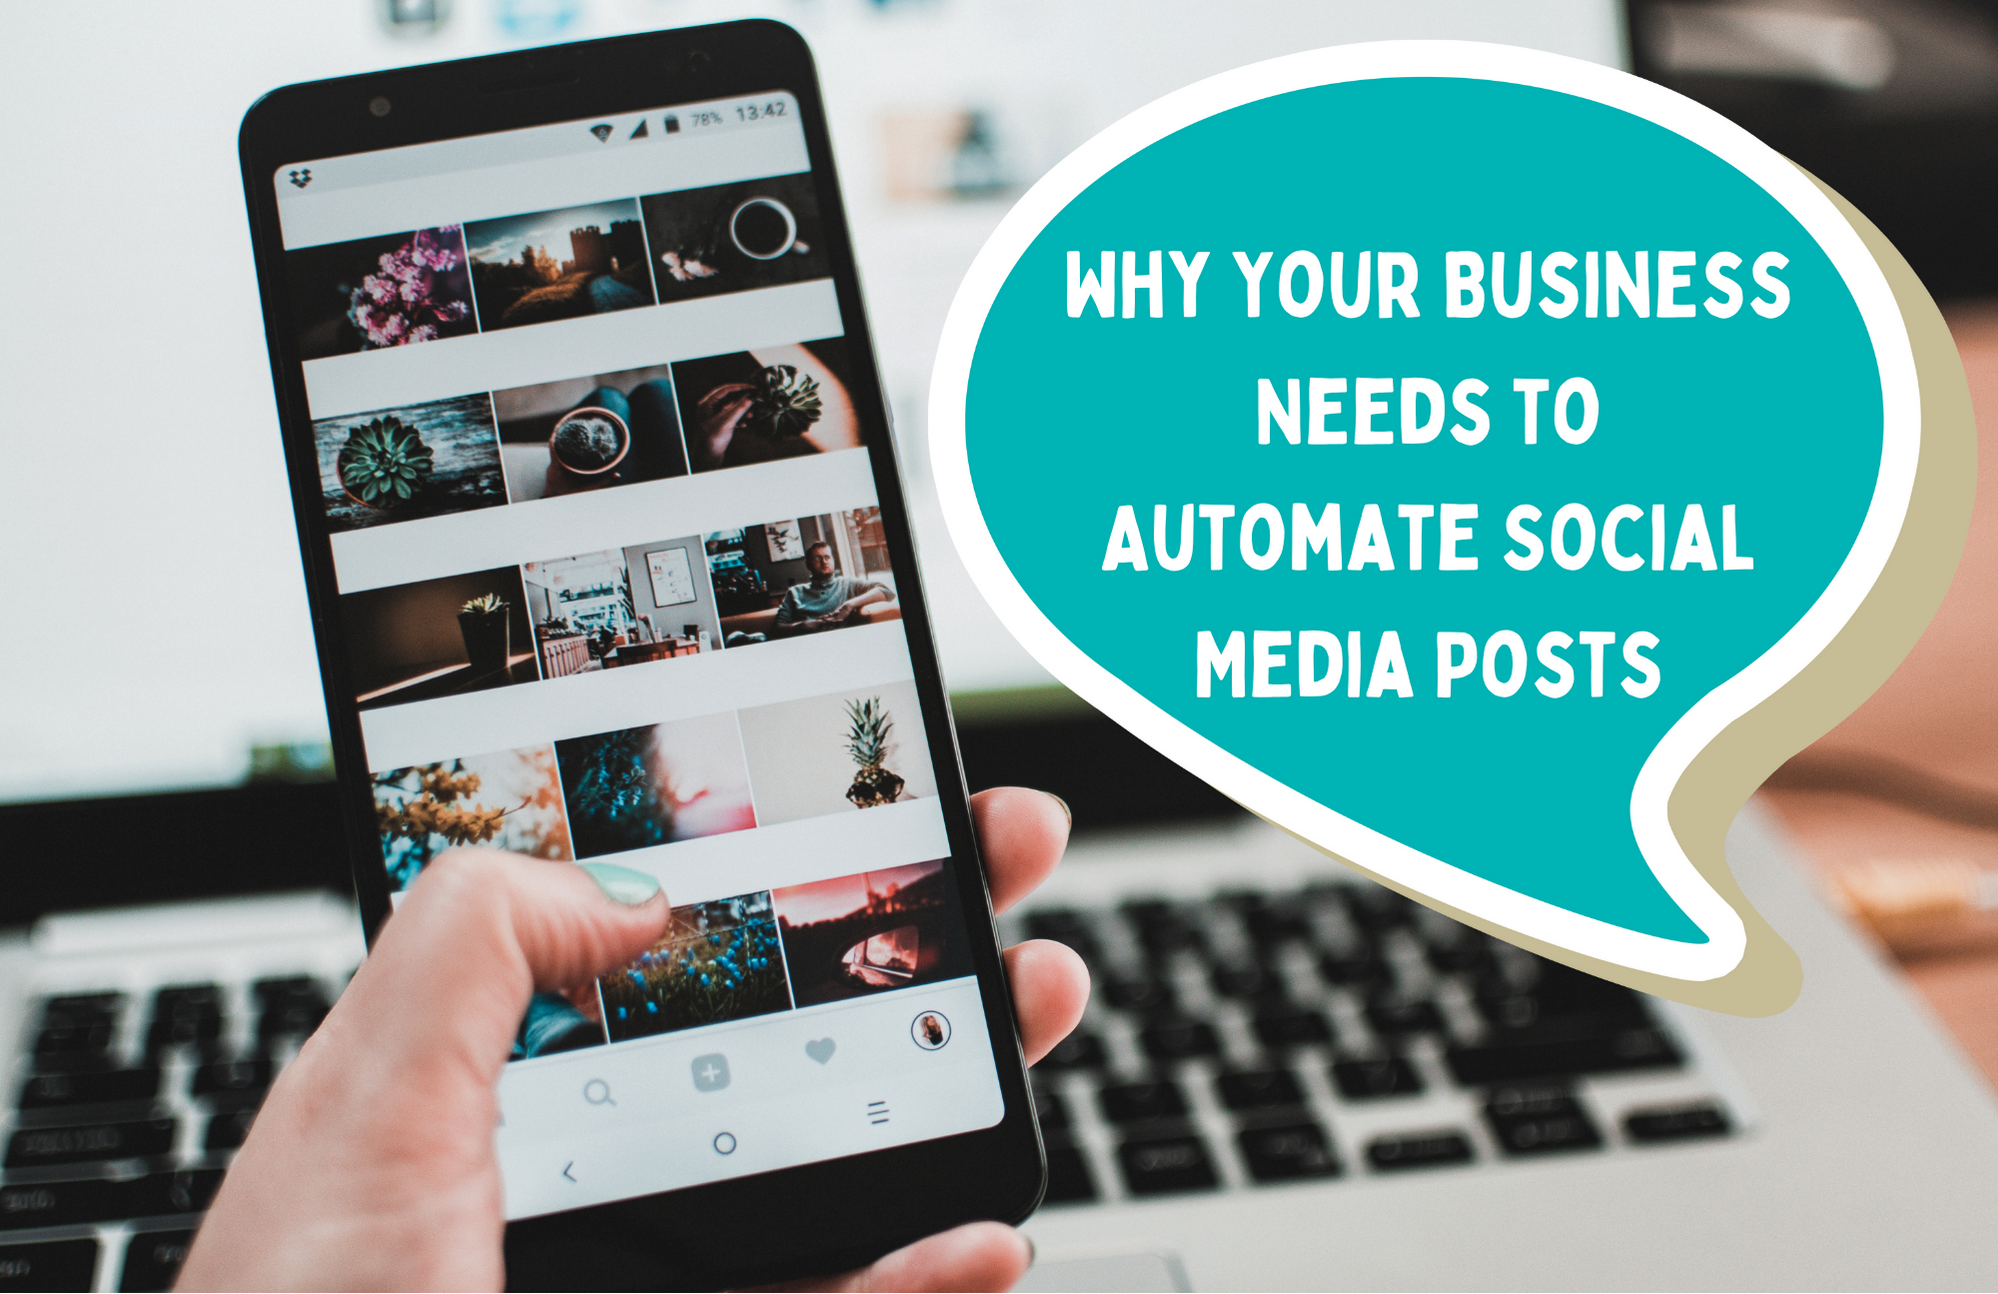 Why Your Business Needs to Automate Social Media Posts